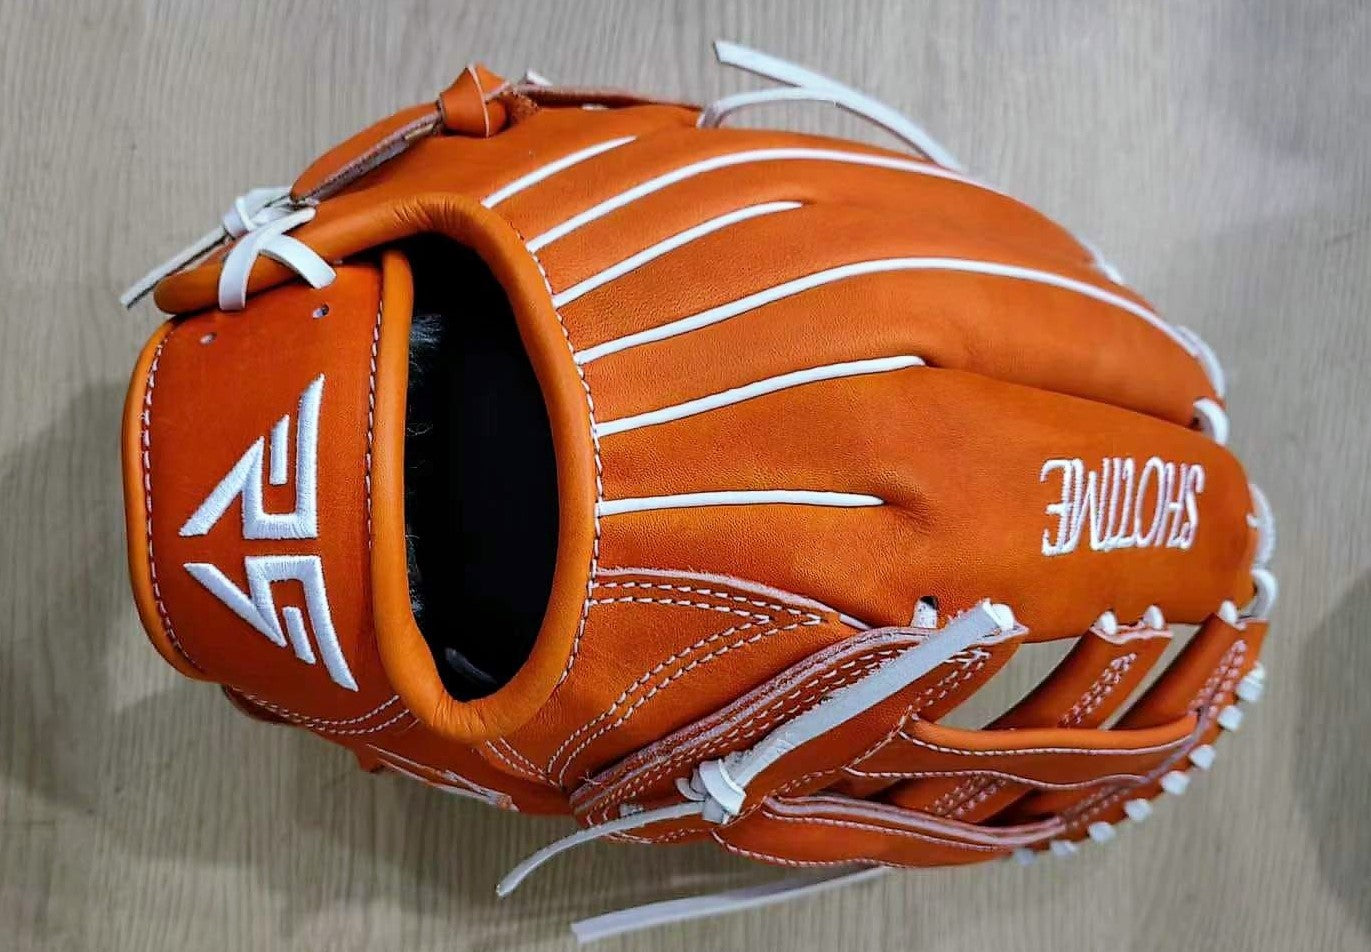 Personalize Your Play with Custom Baseball Gloves